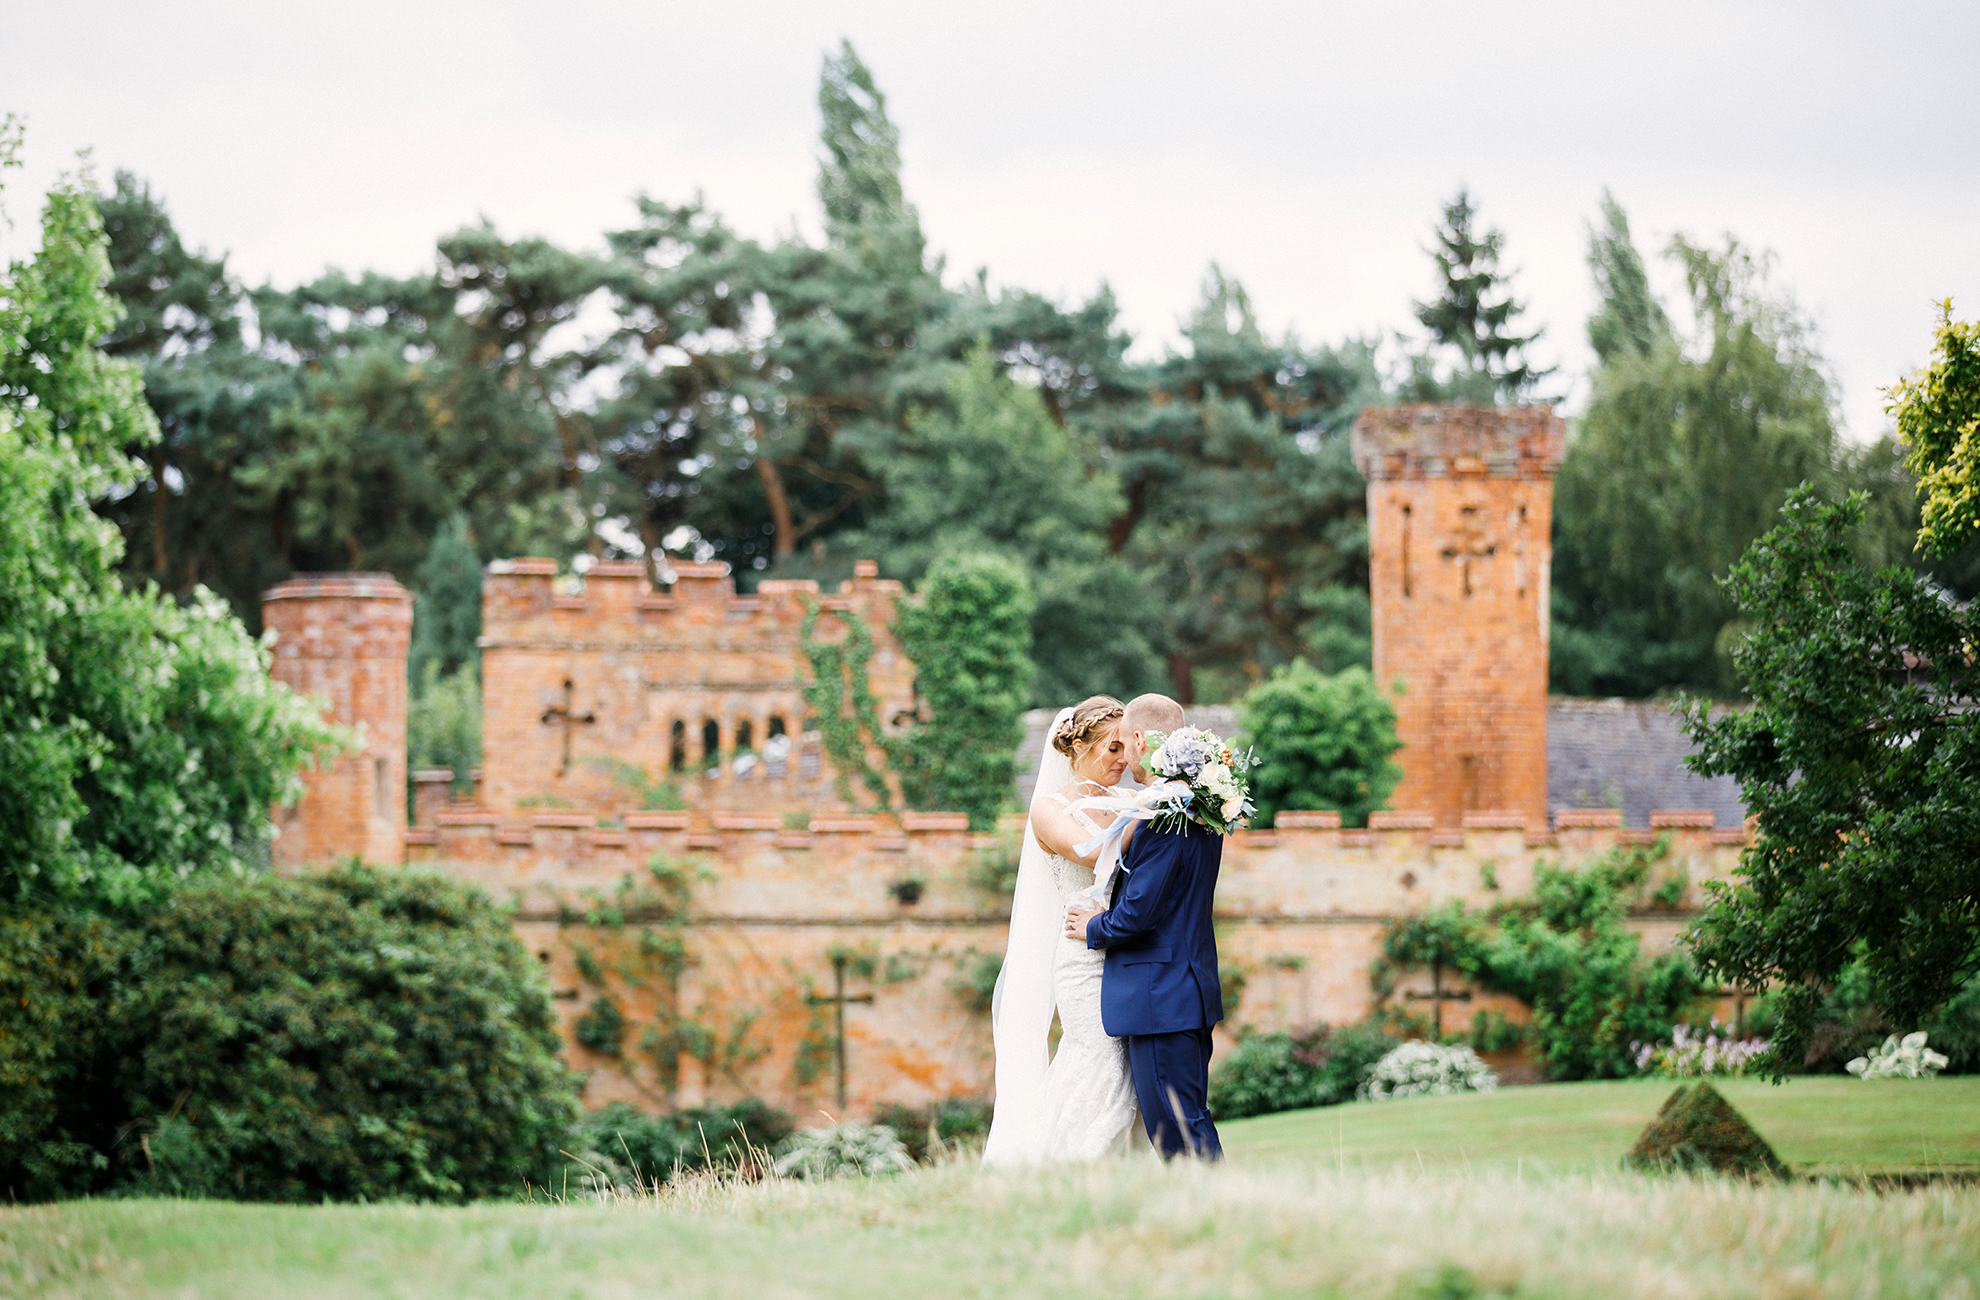 Wedding Planning: 8 Reasons to Plan a 2020 Wedding at Combermere Abbey